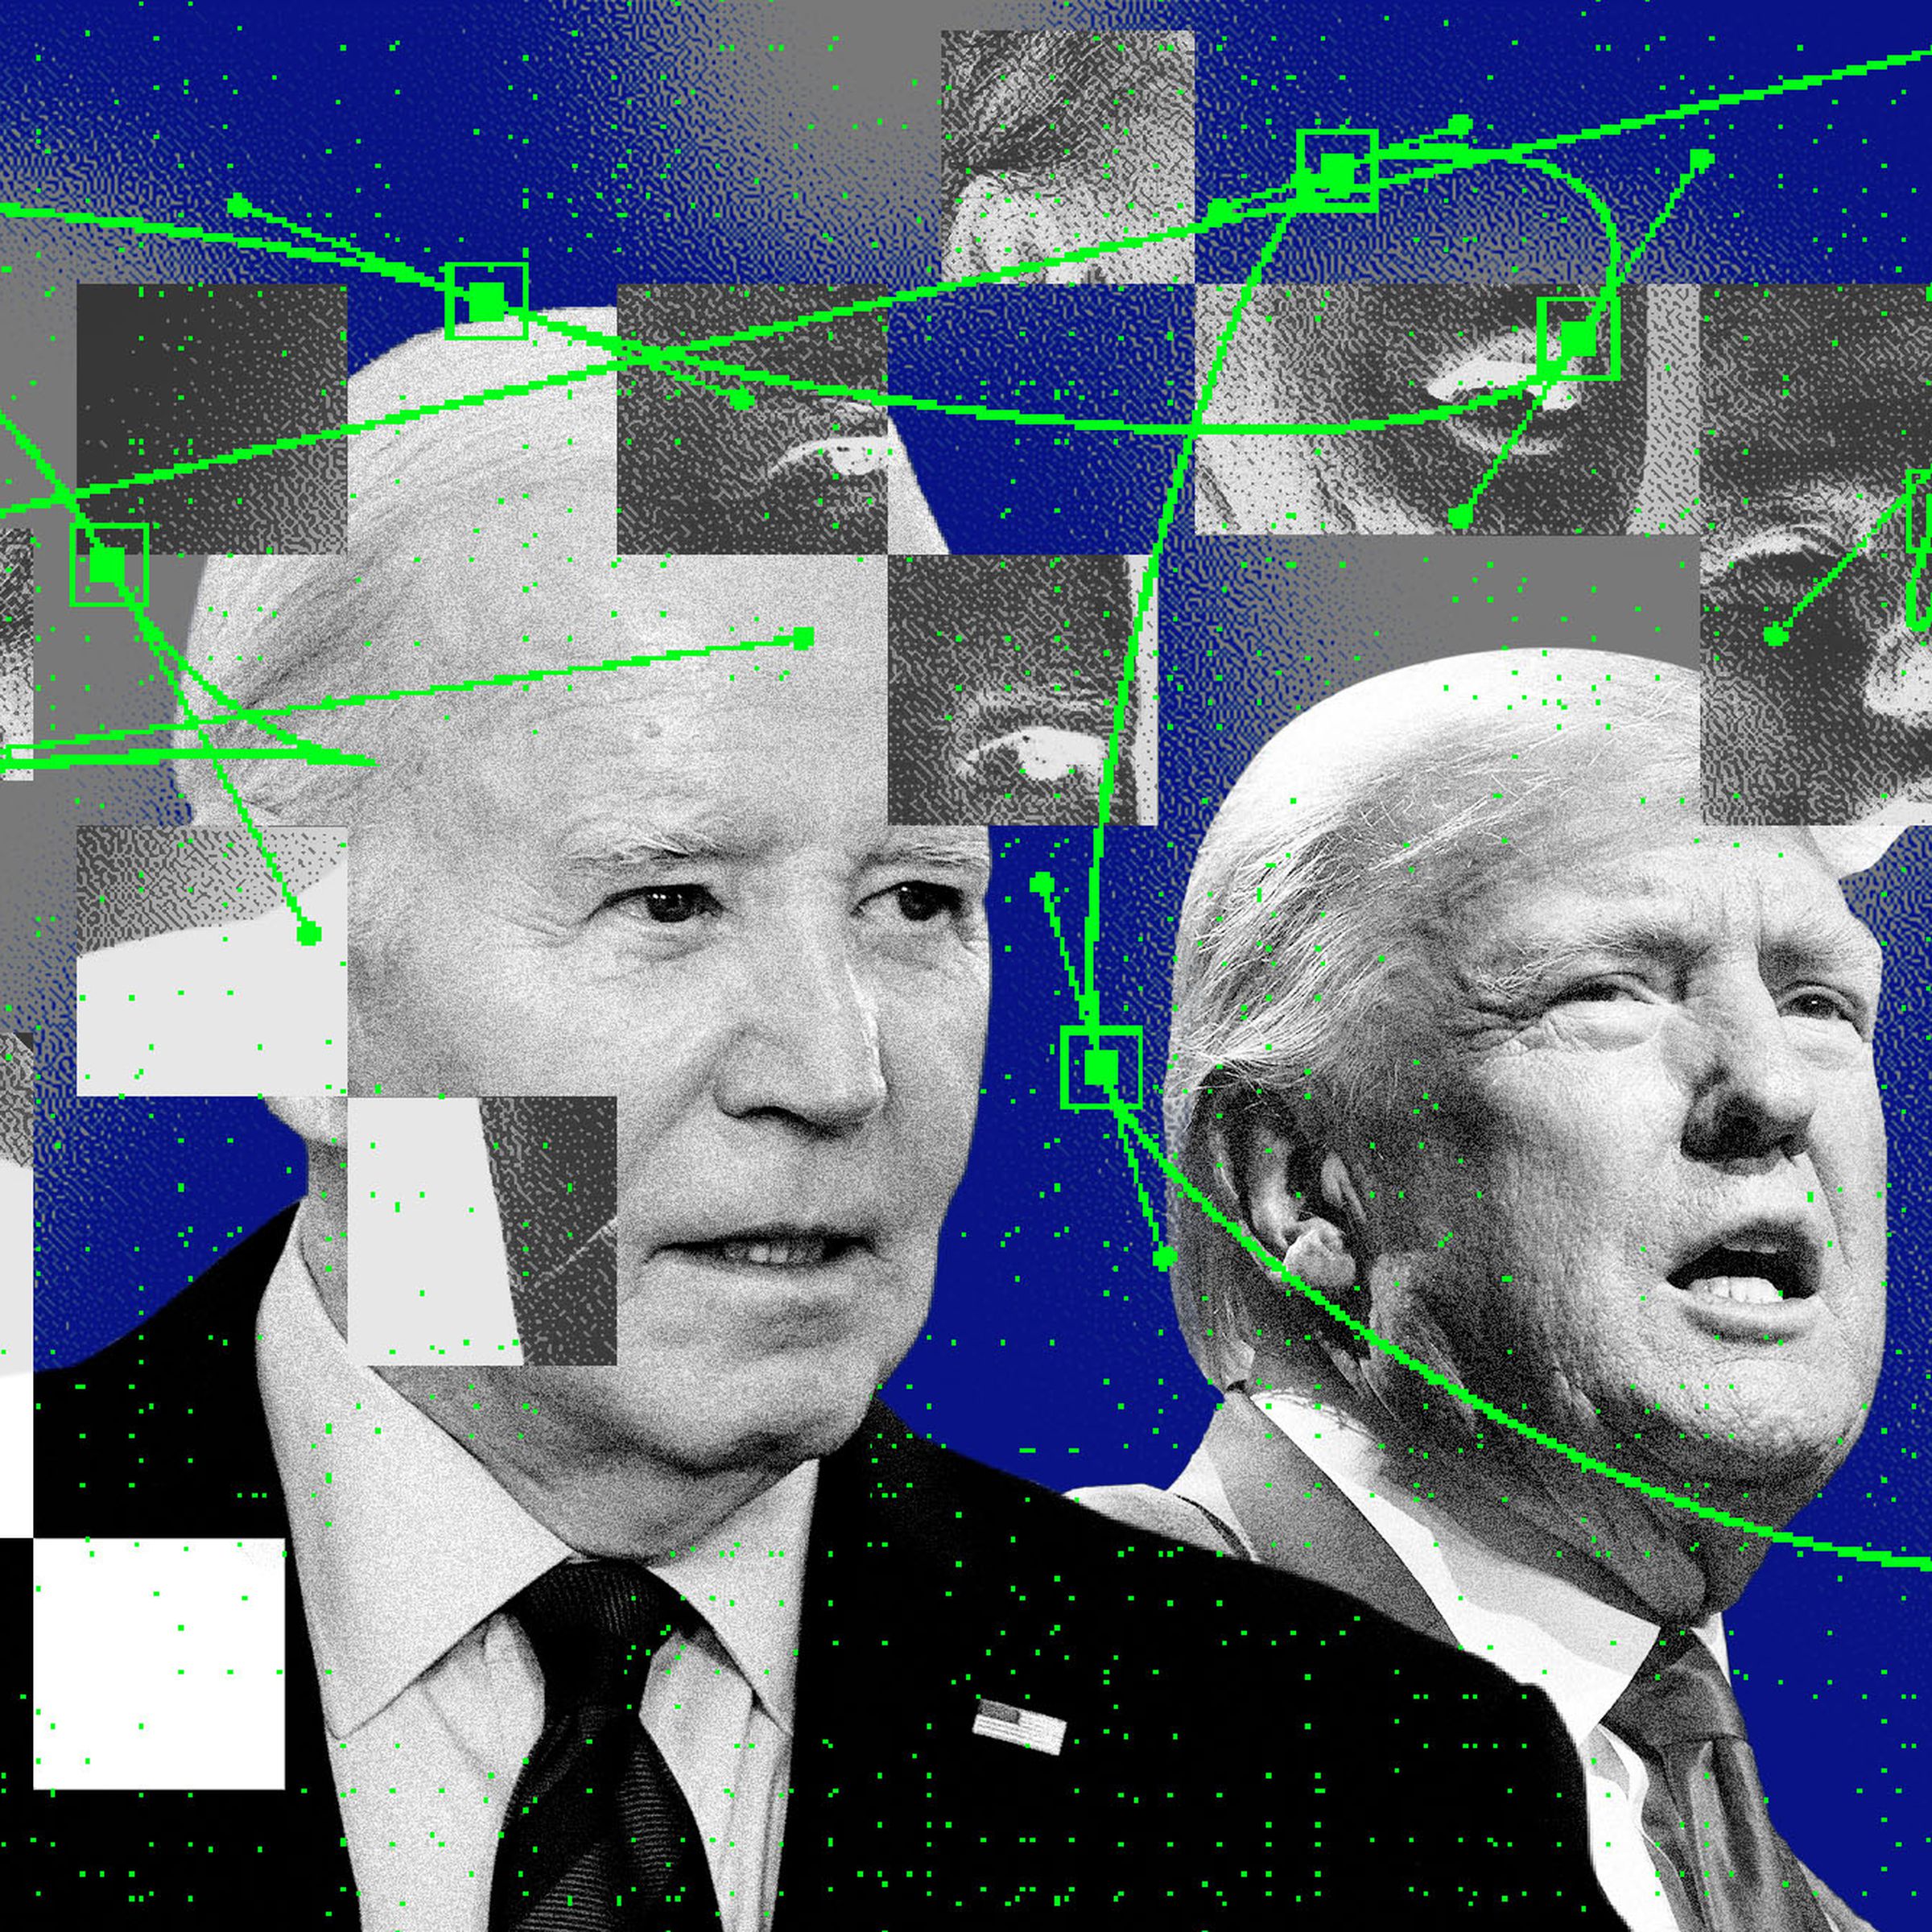 Photo illustration of Joe Biden and Donald Trump‘s faces being used for deep fake videos.